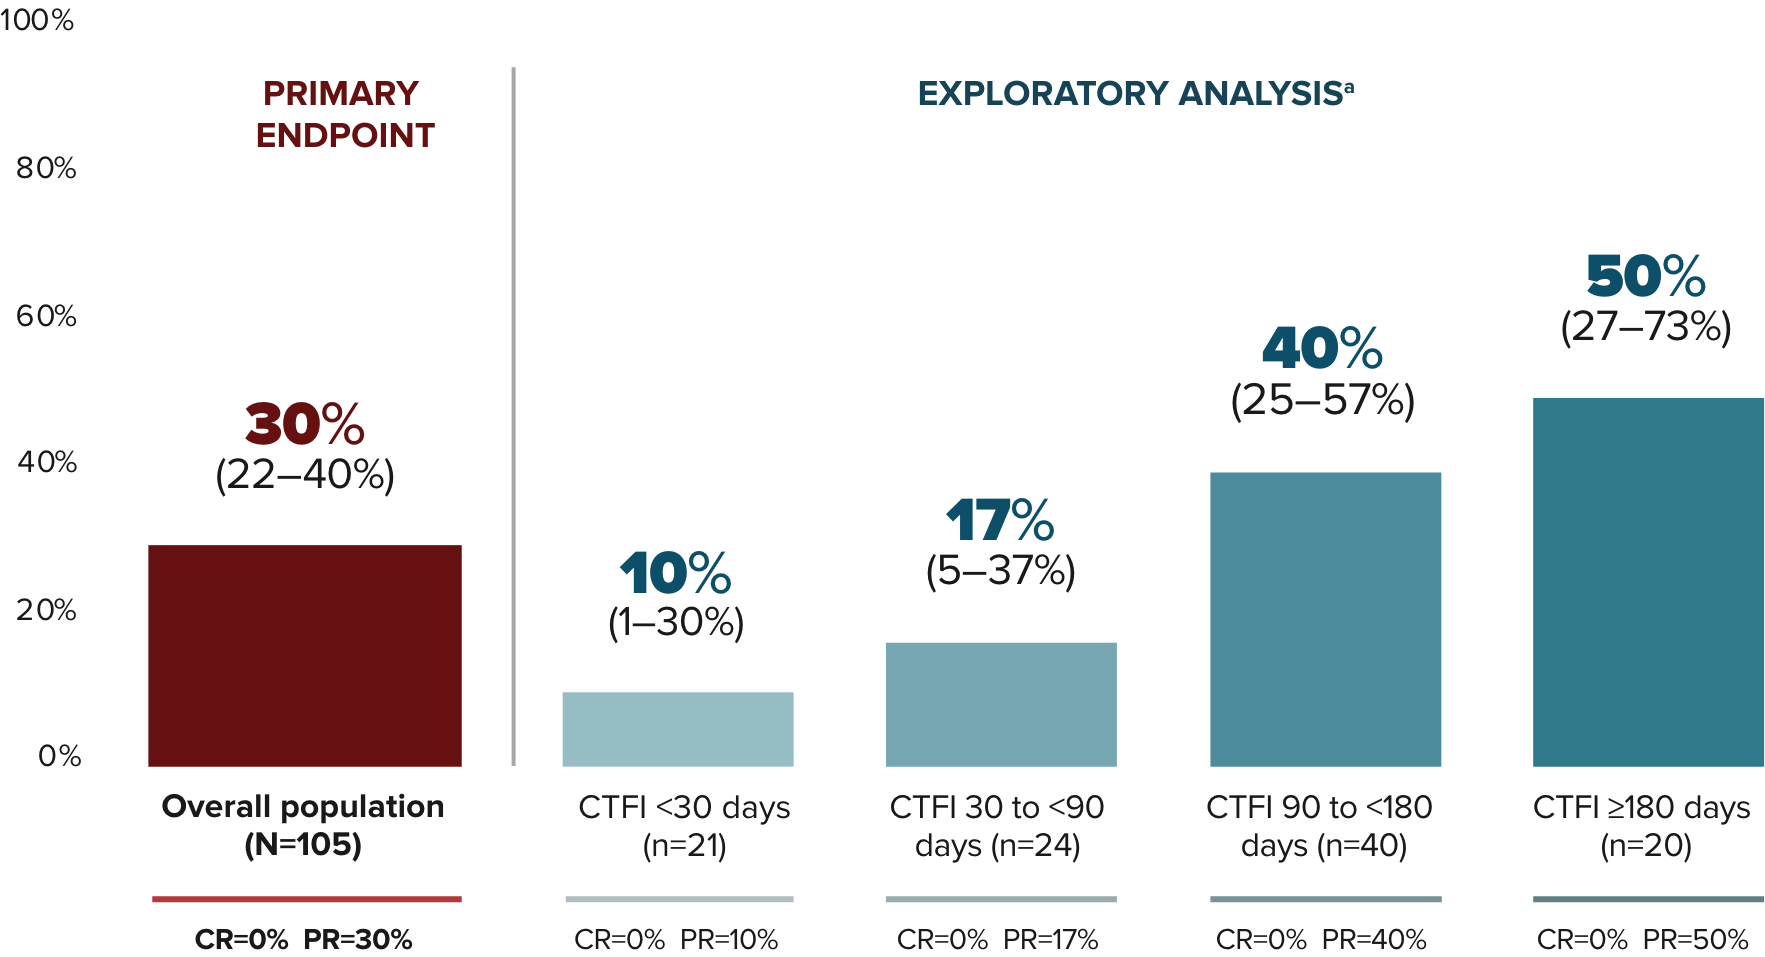 IRC assessment of primary endpoint. Overall response rate in the overall population: 30% (22-40%) (N=105). CR=0%, PR=30%.